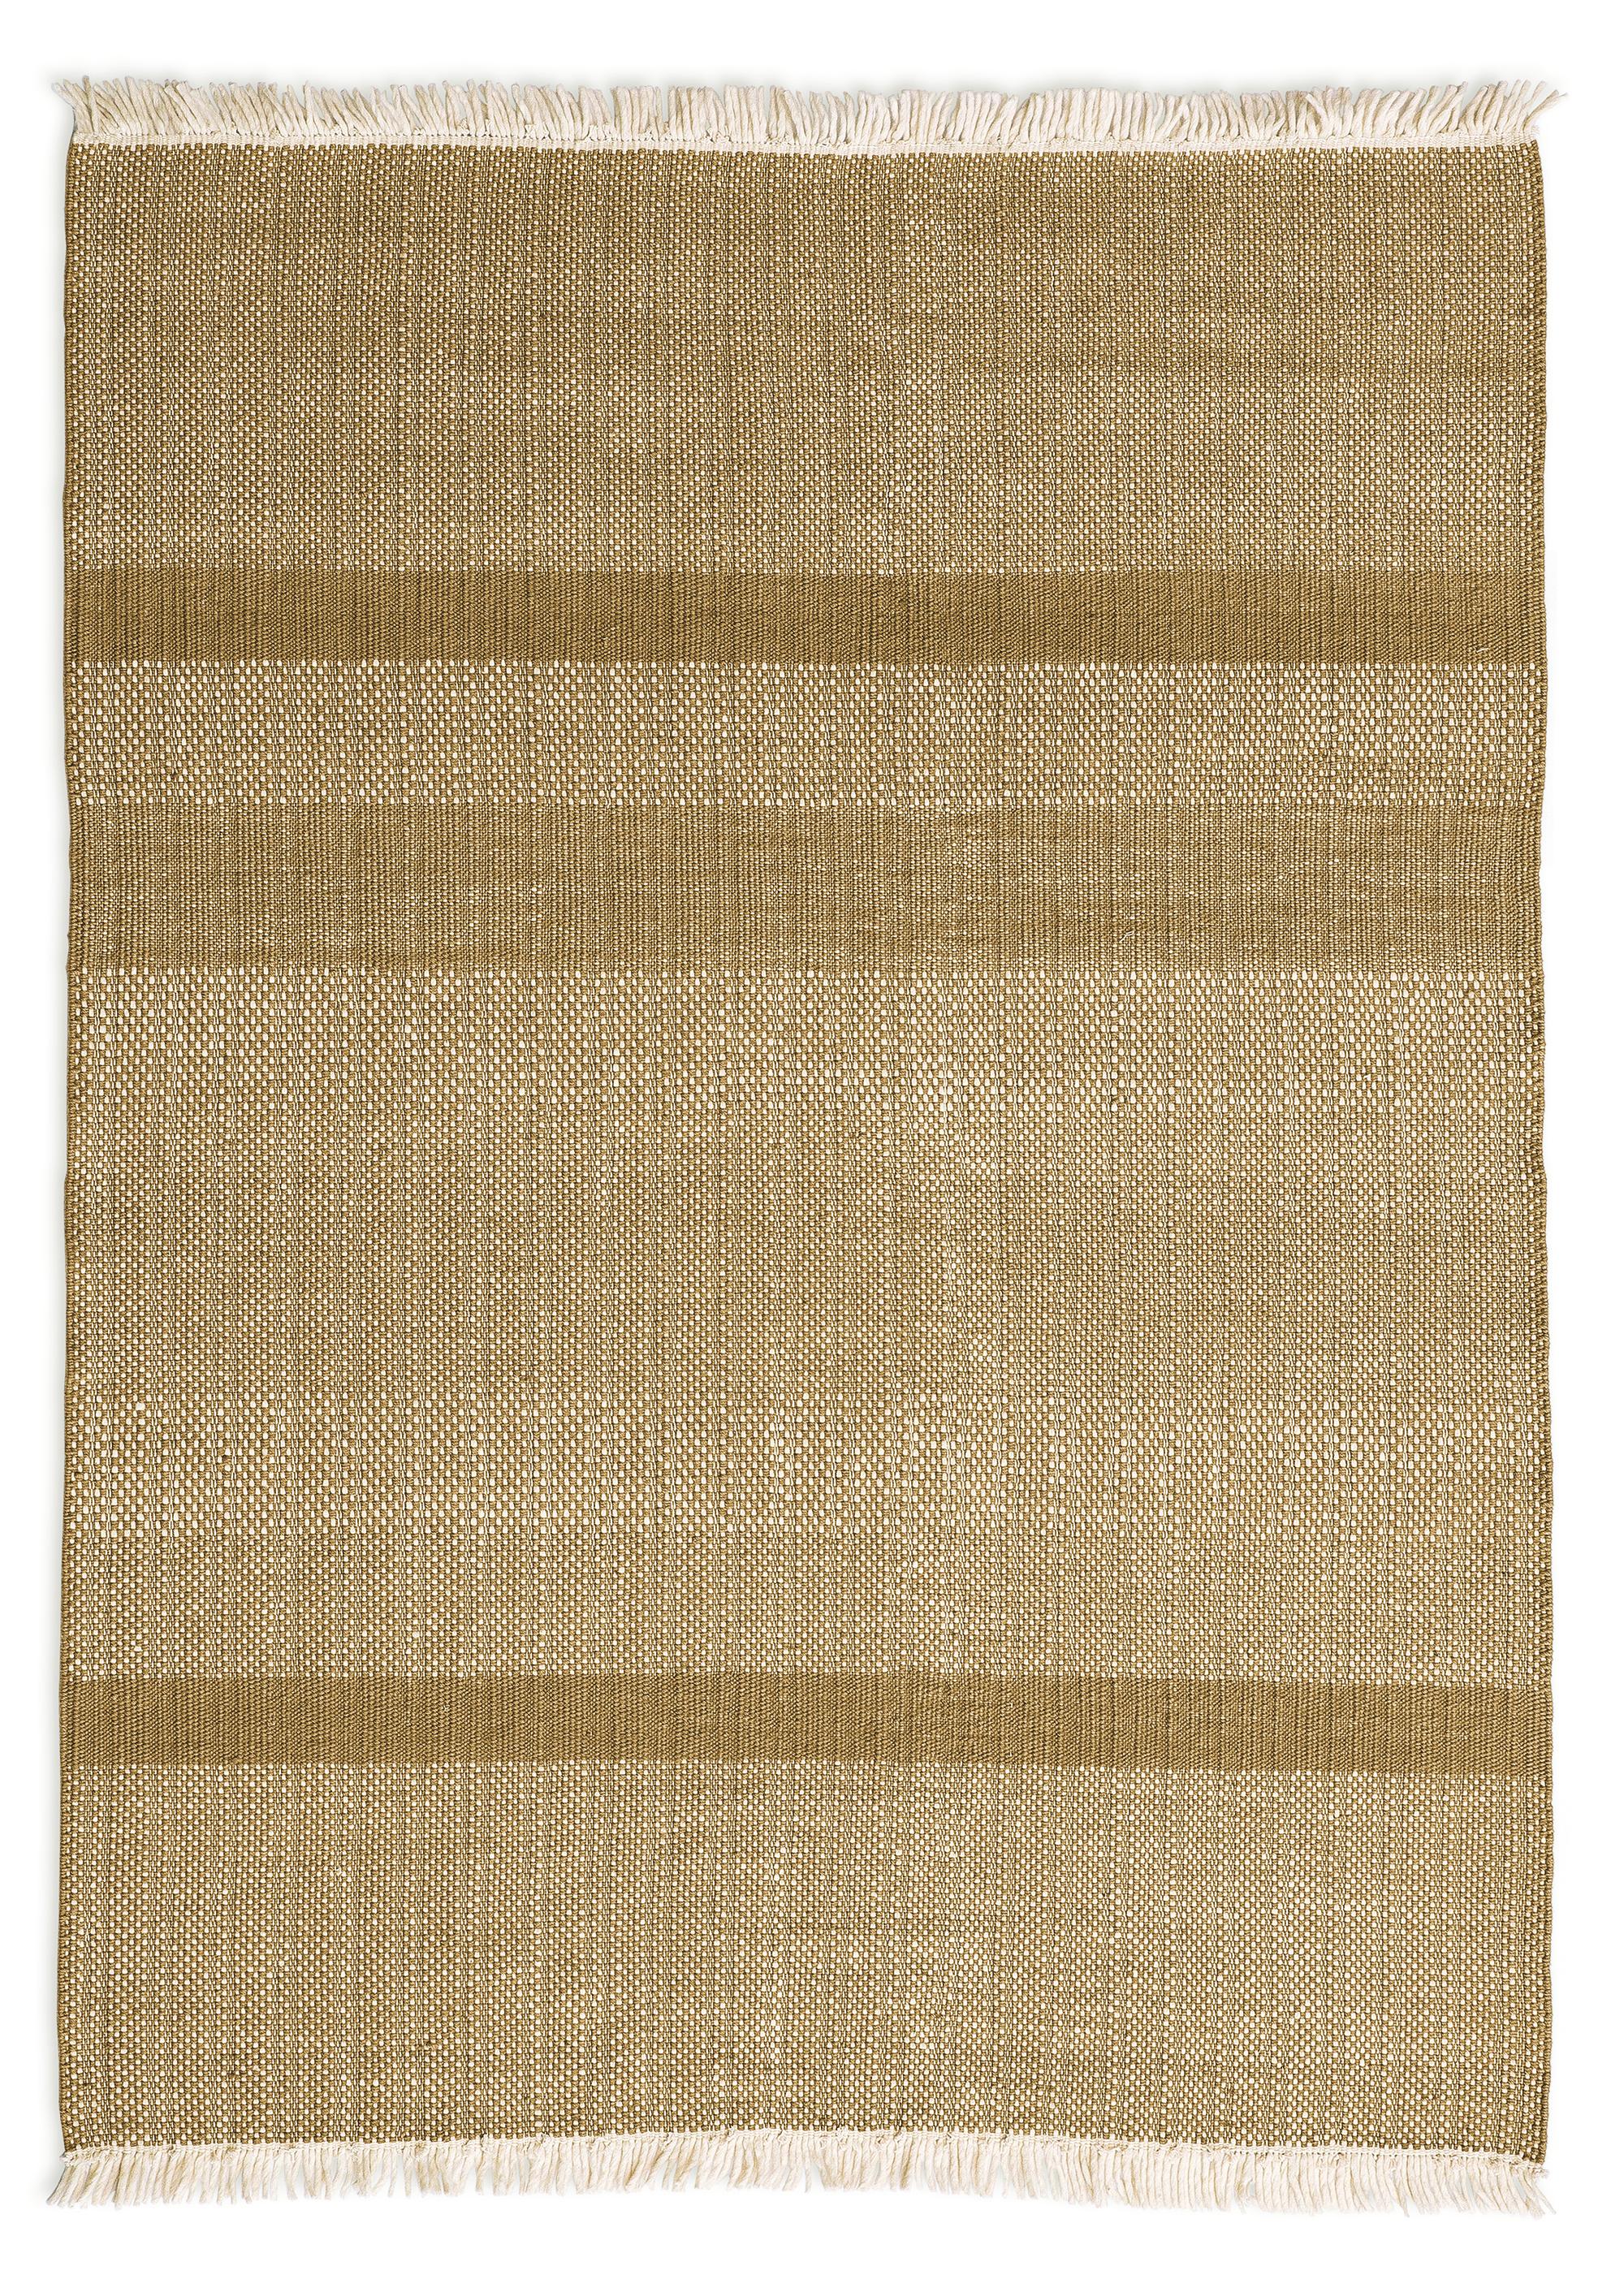 Small 'Tres Texture' Hand-Loomed Rug for Nanimarquina For Sale 2